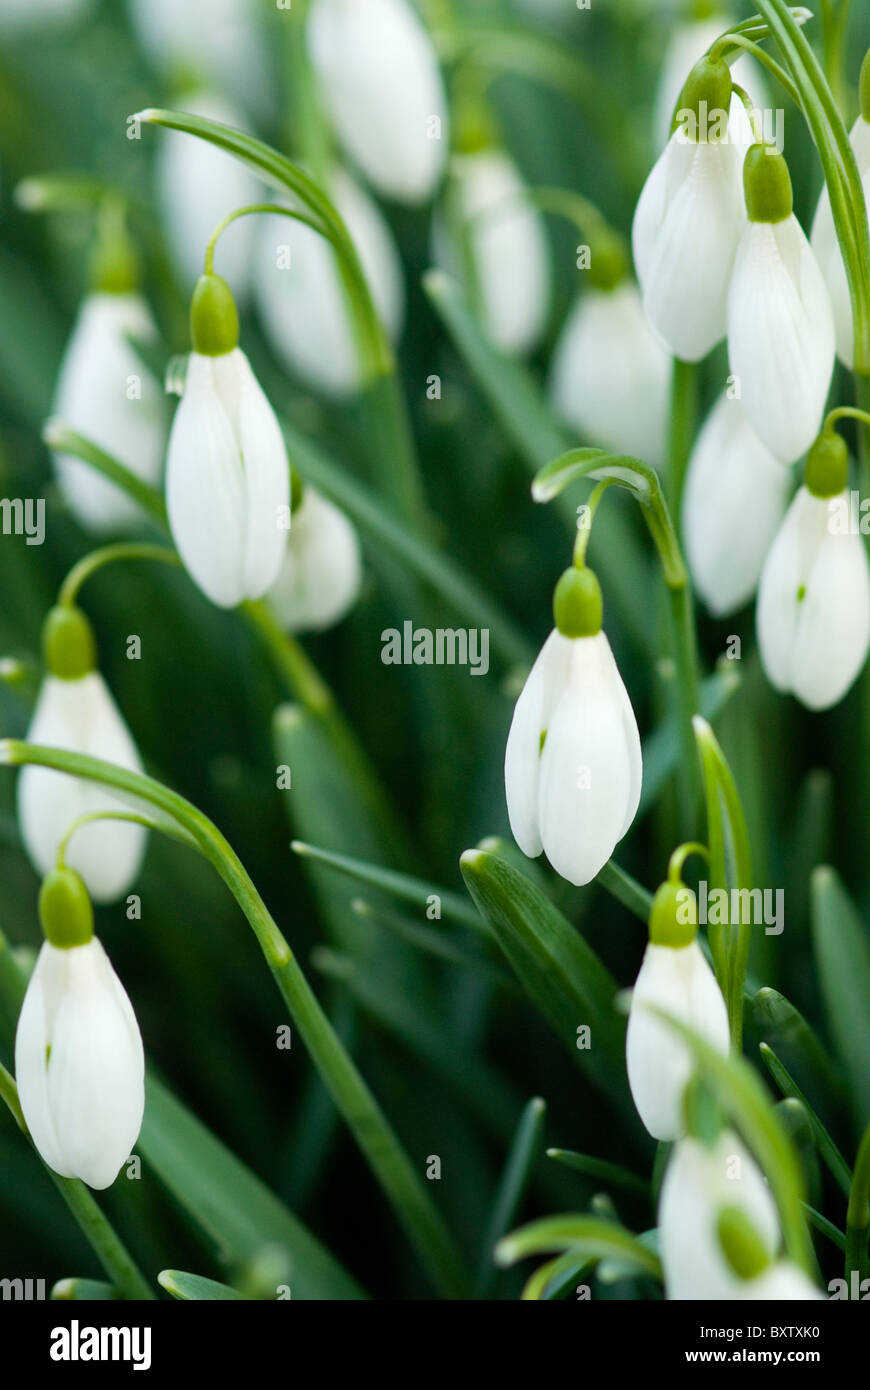 Snowdrops in a bunch from slightly above Stock Photo